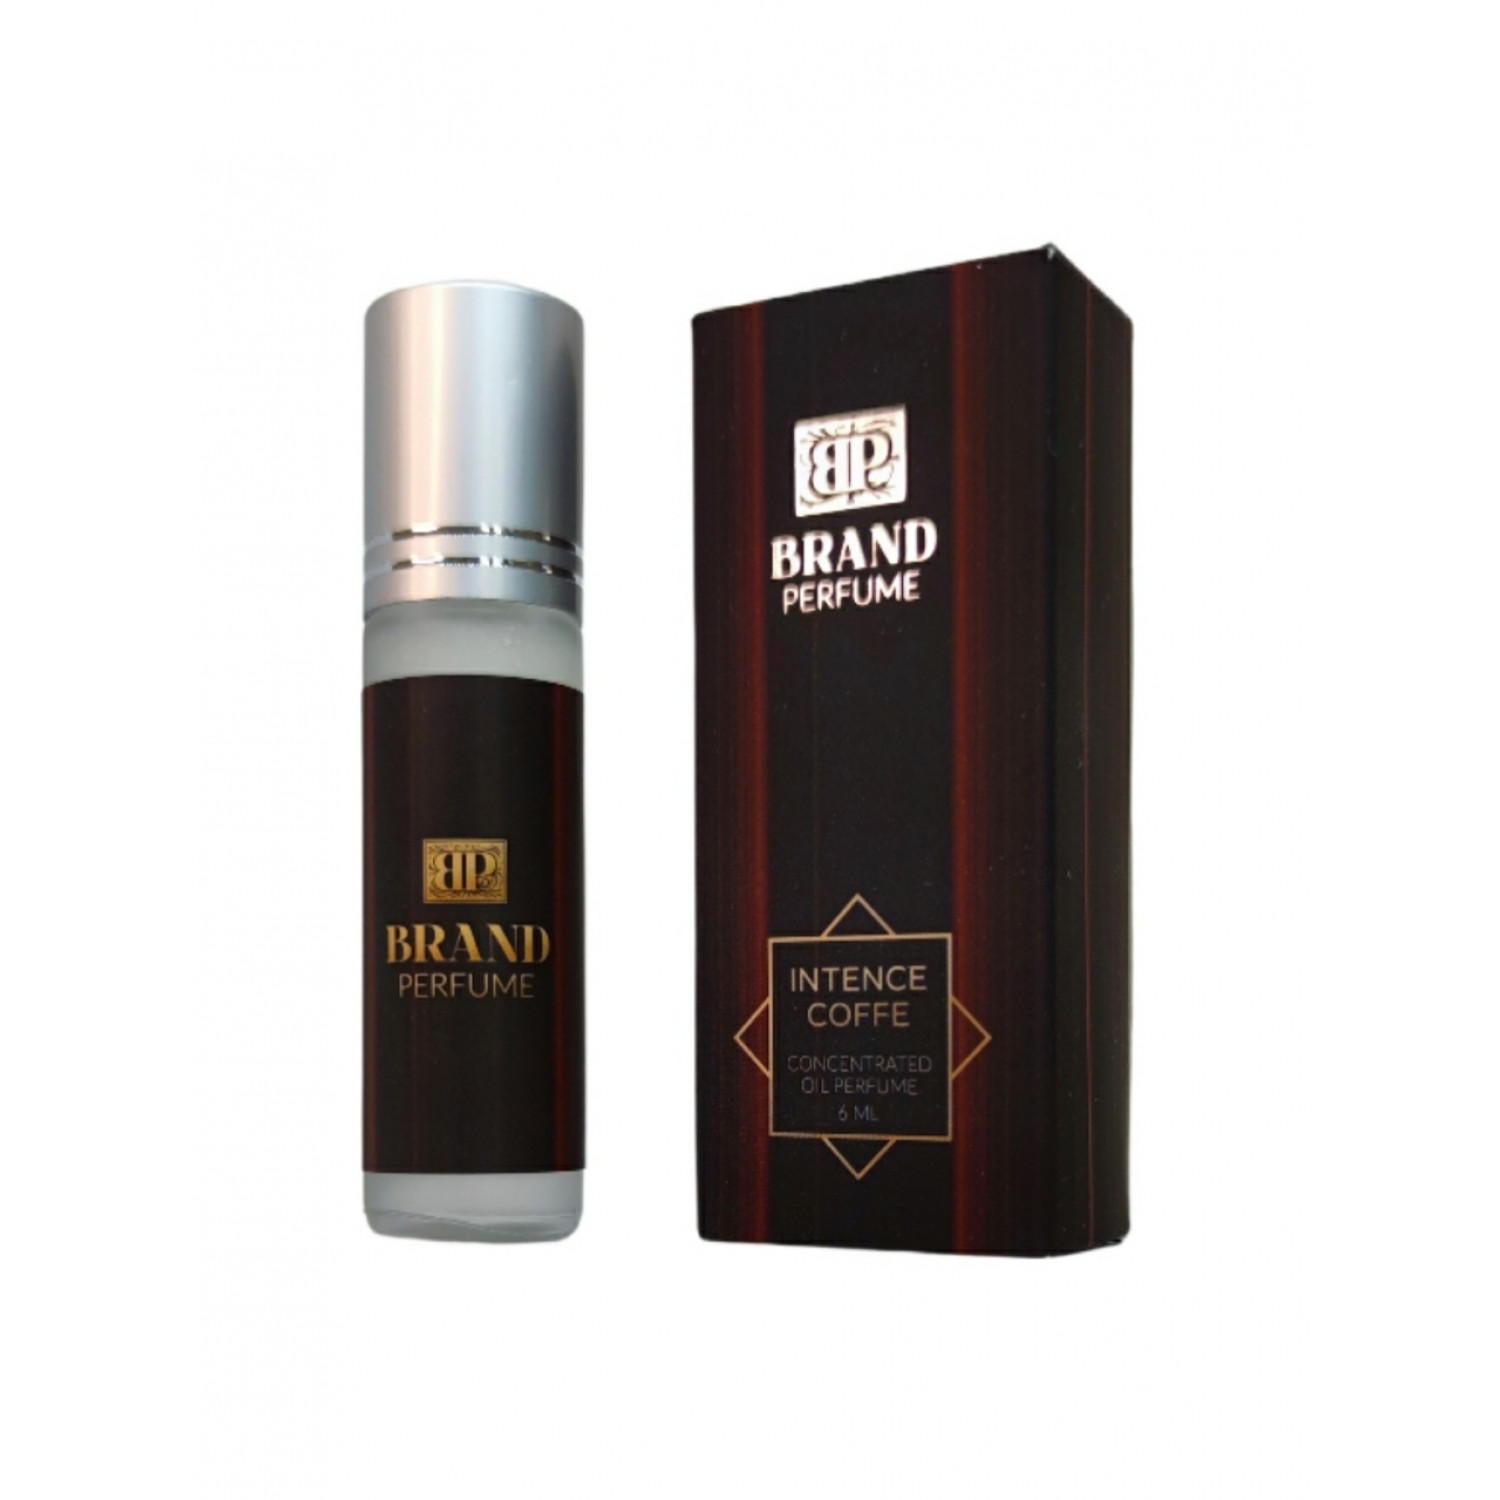 INTENCE COFFE Concentrated Oil Perfume, Brand Perfume (Концентрированные масляные духи), ролик, 6 мл.